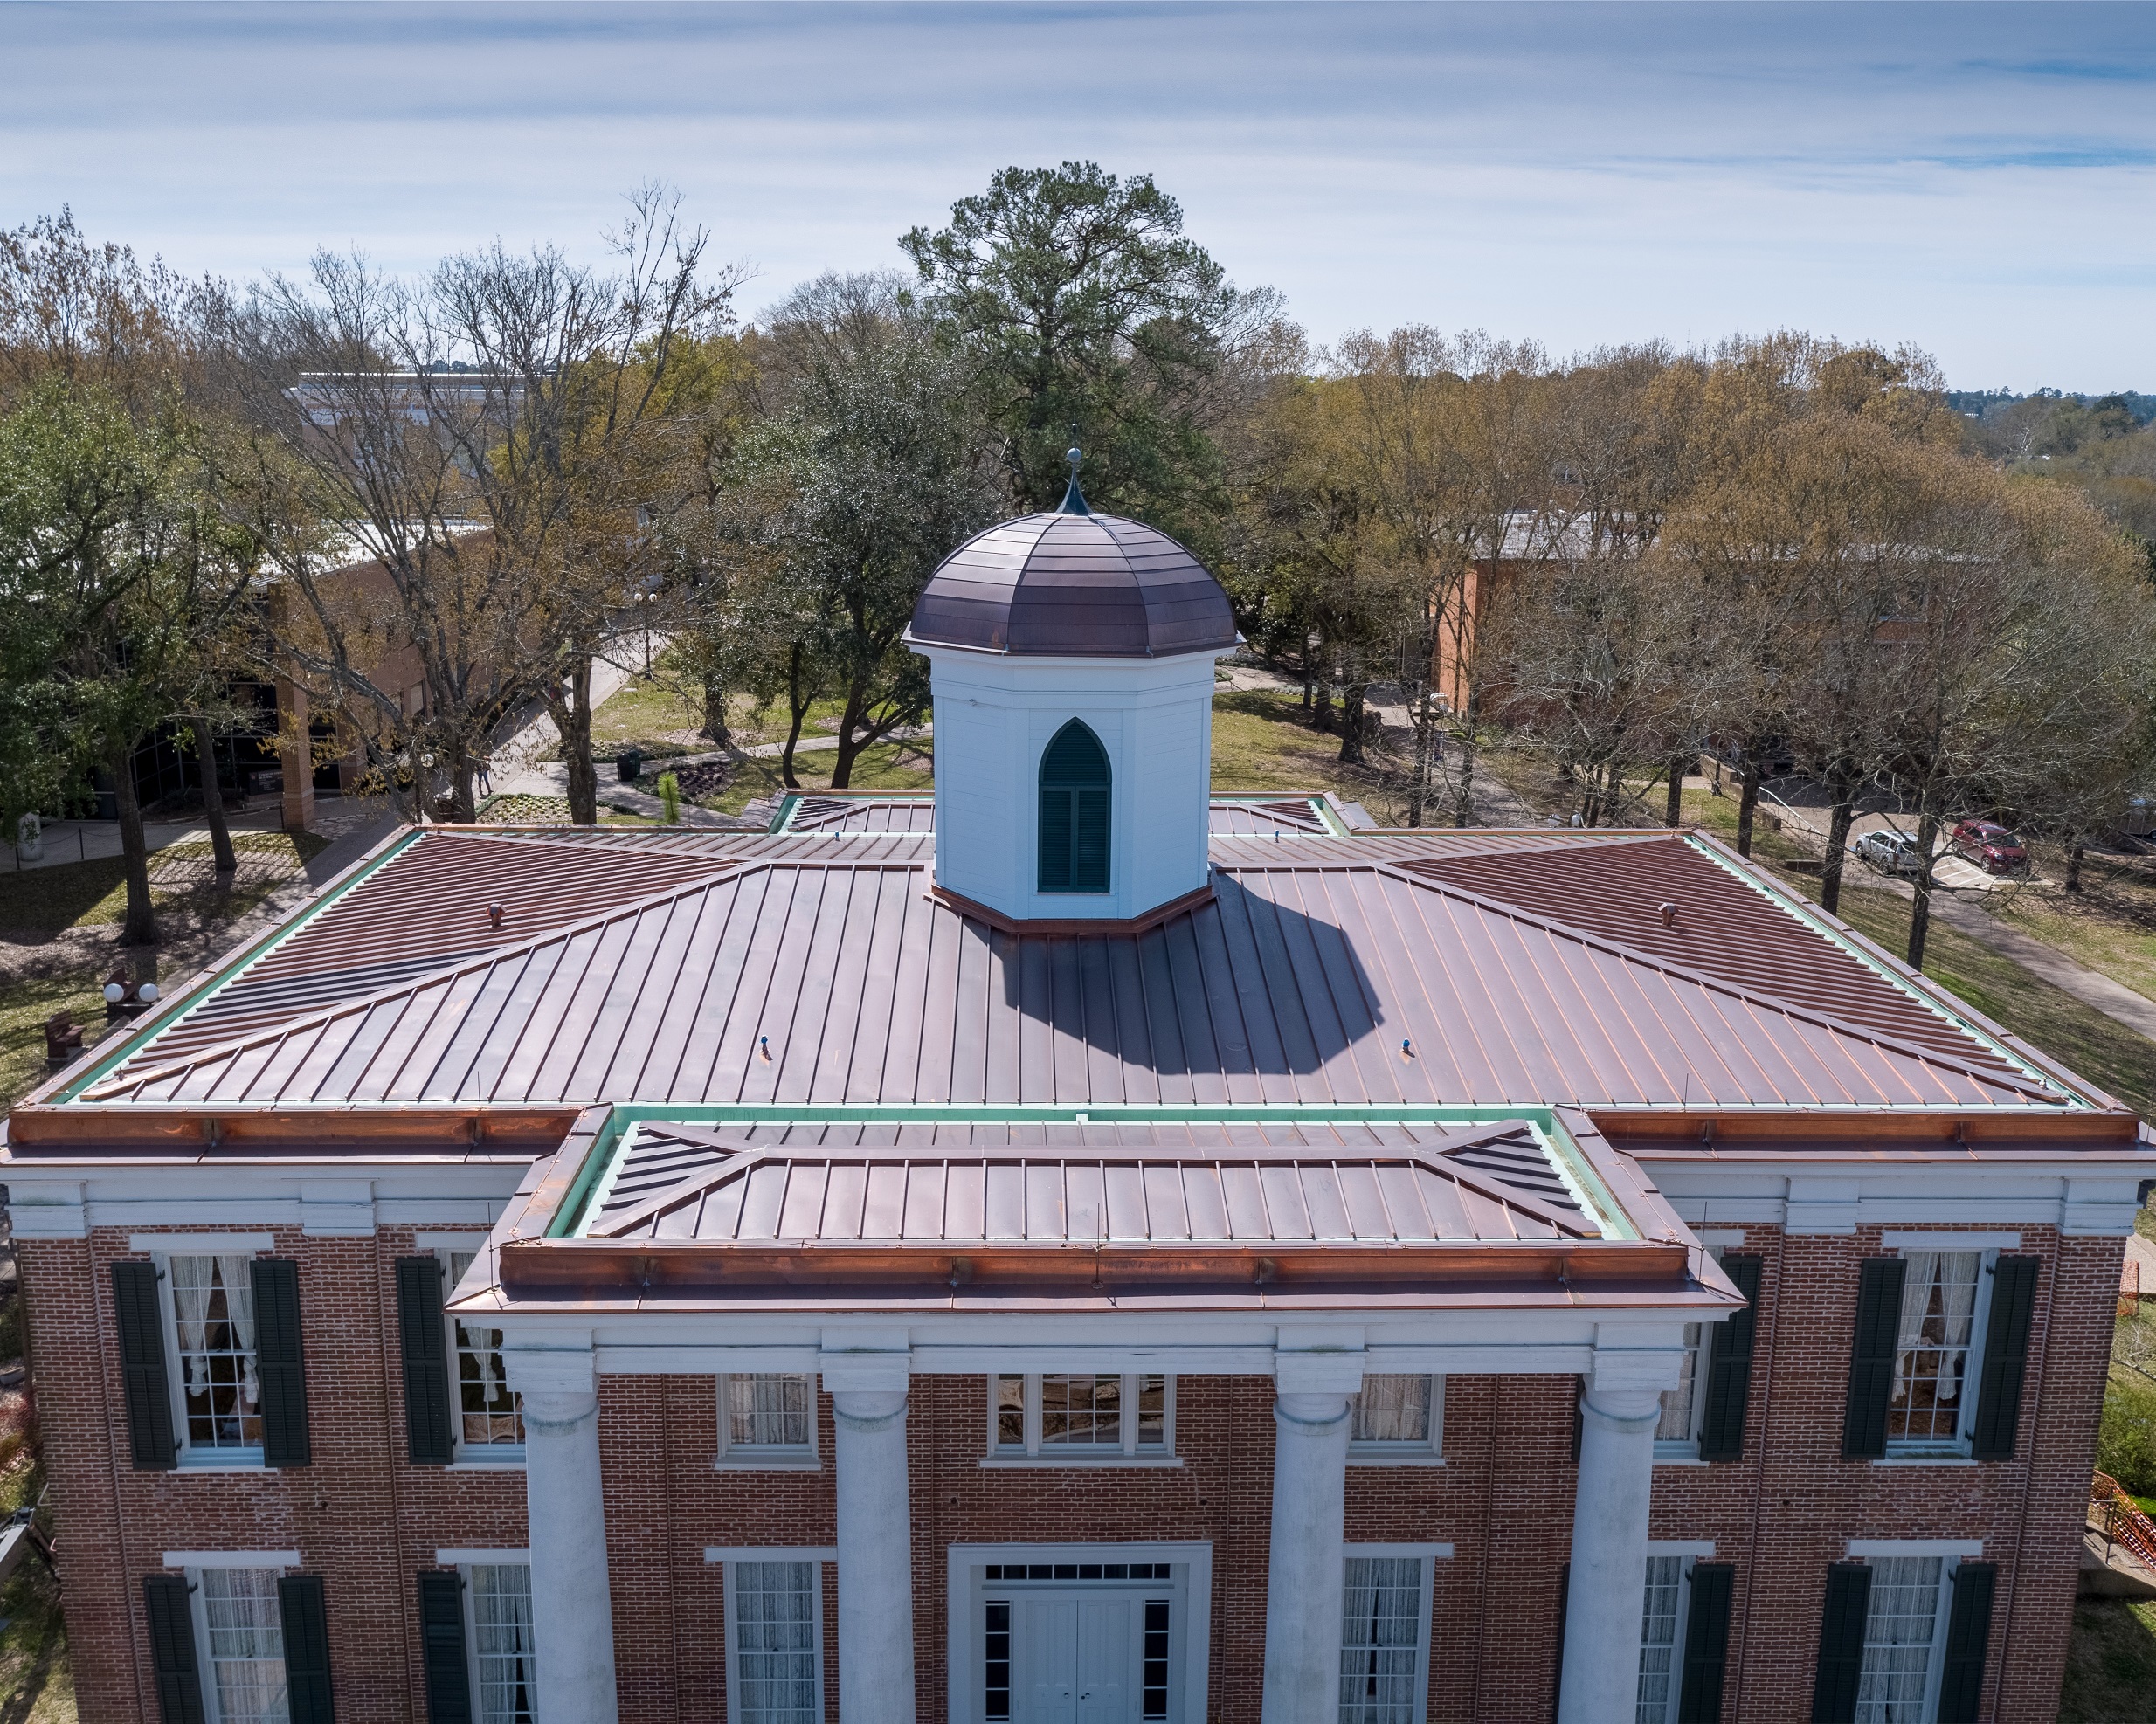 Roof Re-Cover Meets Challenges of Historic Integrity